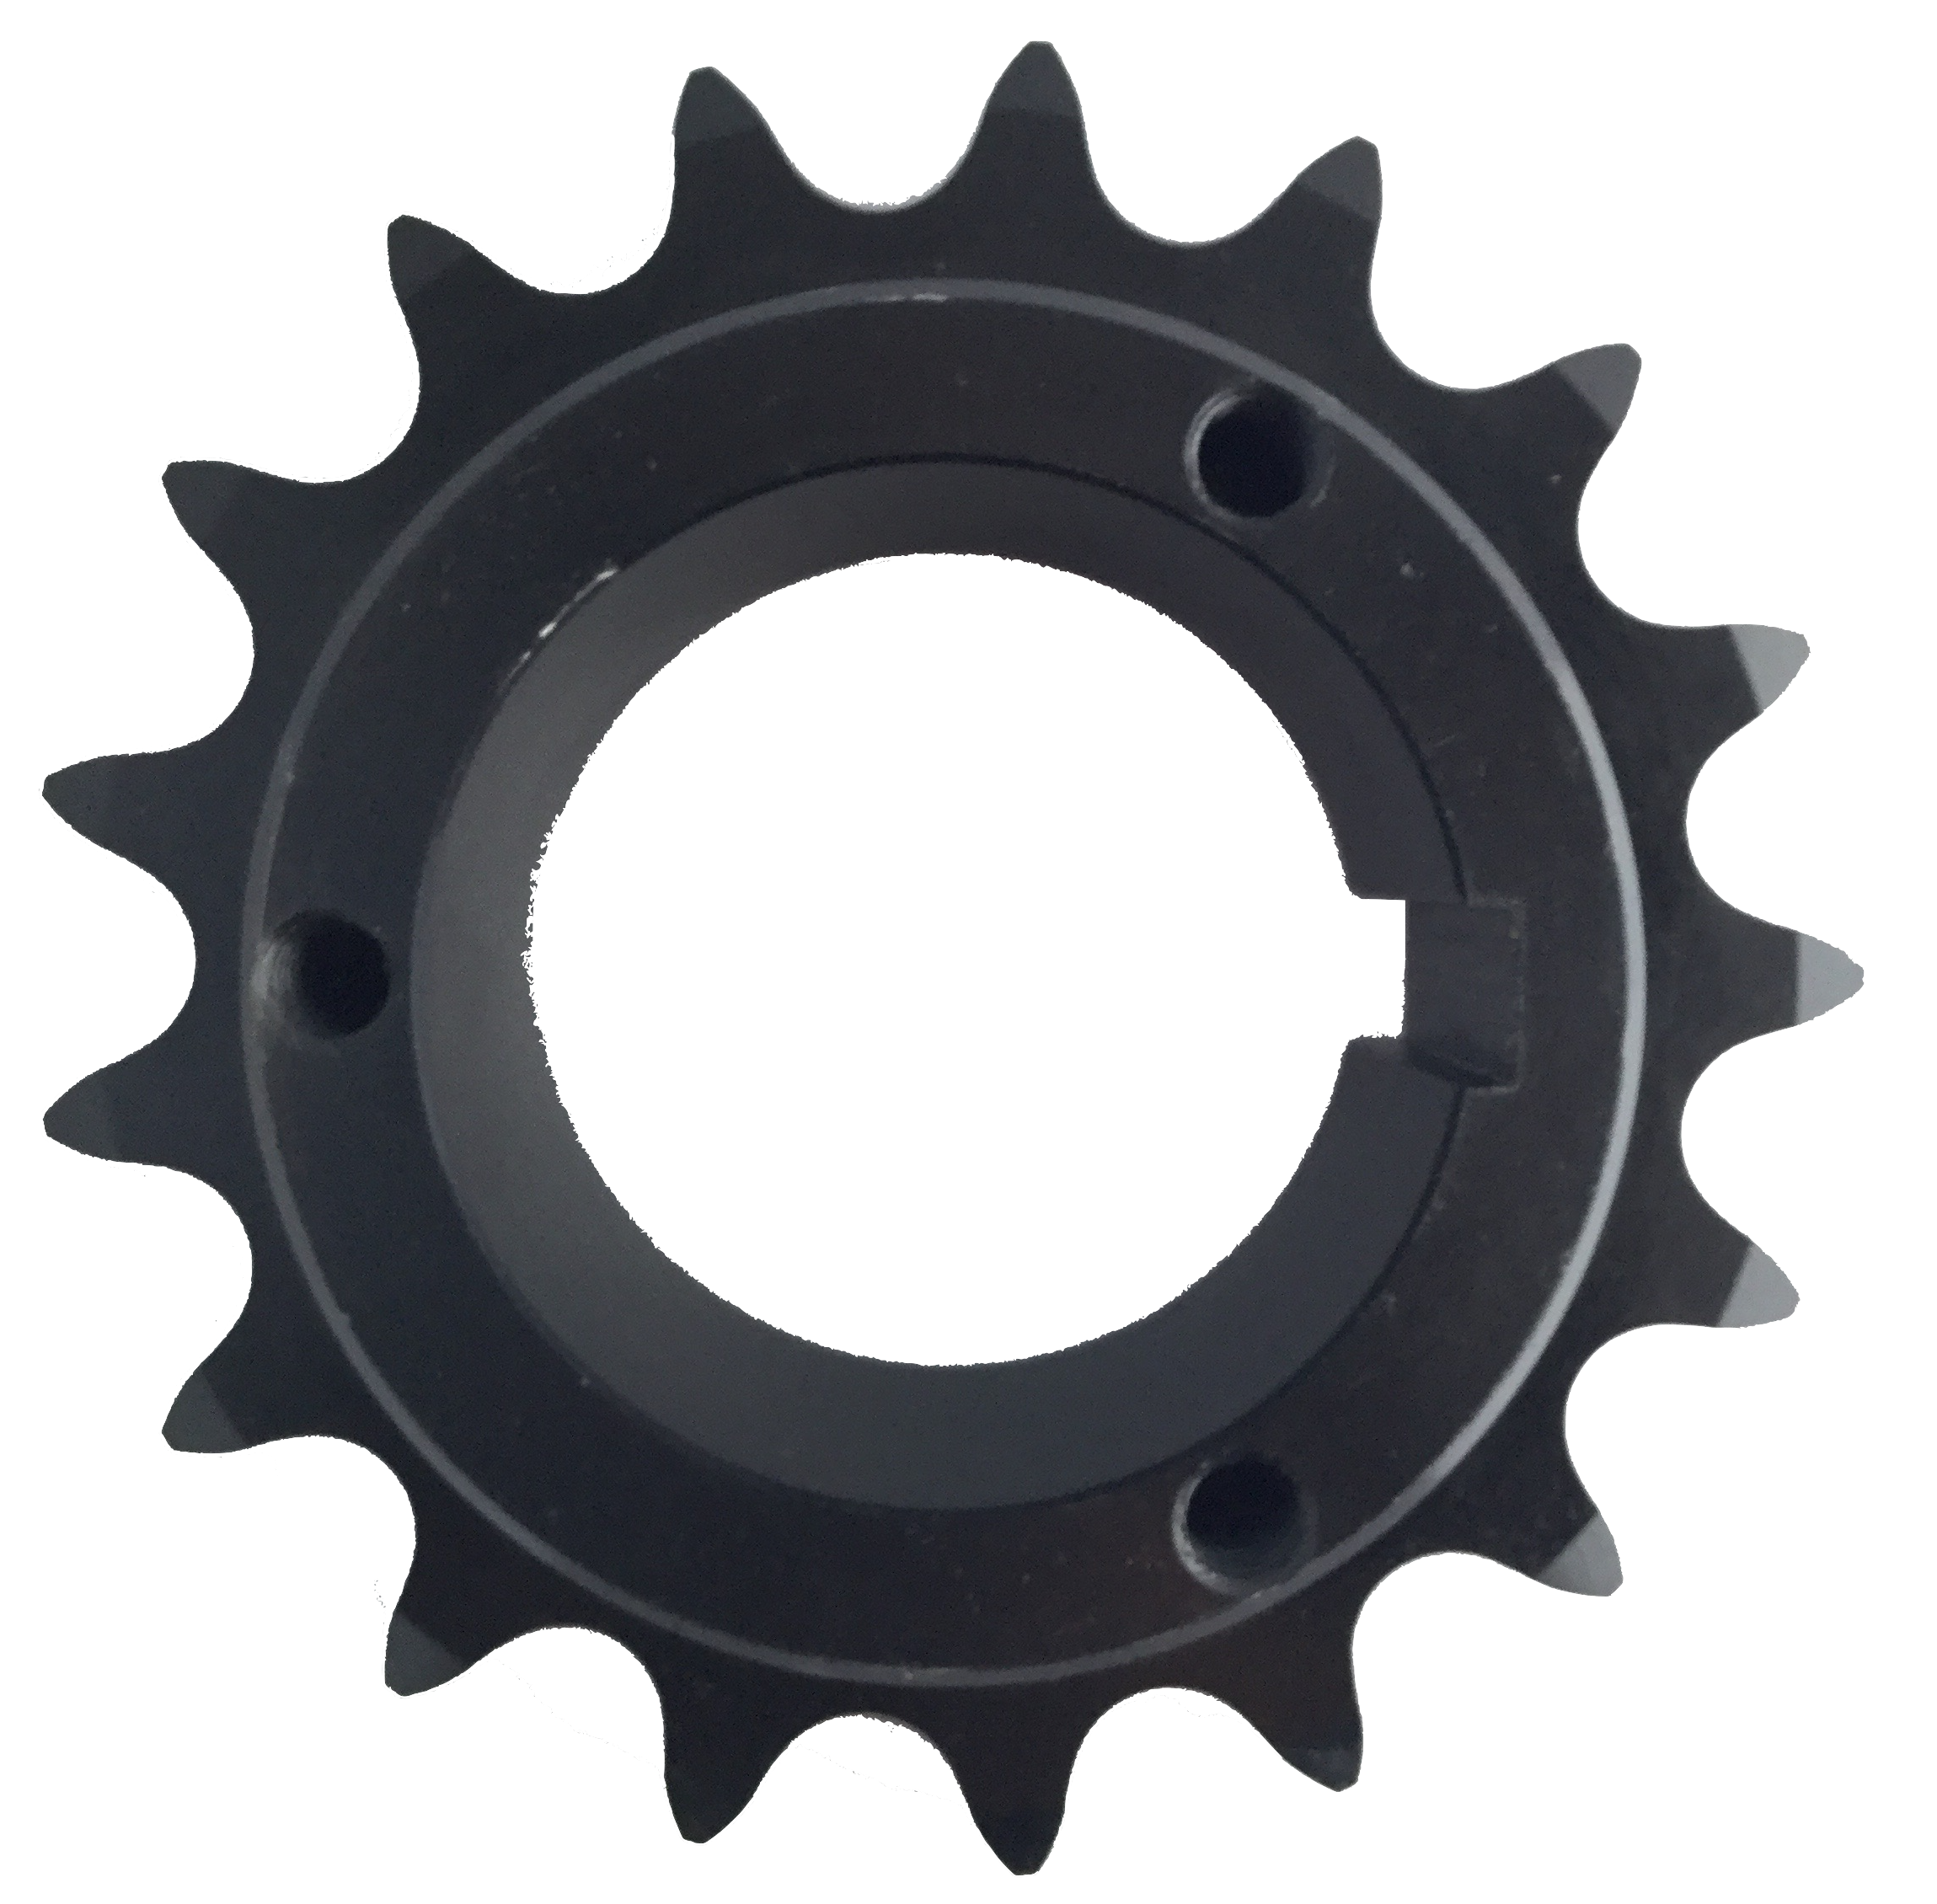 Froedge H80Q17 17-Tooth, 80 Standard Roller Chain Split Taper Sprocket (1" Pitch) - Froedge Machine & Supply Co., Inc.